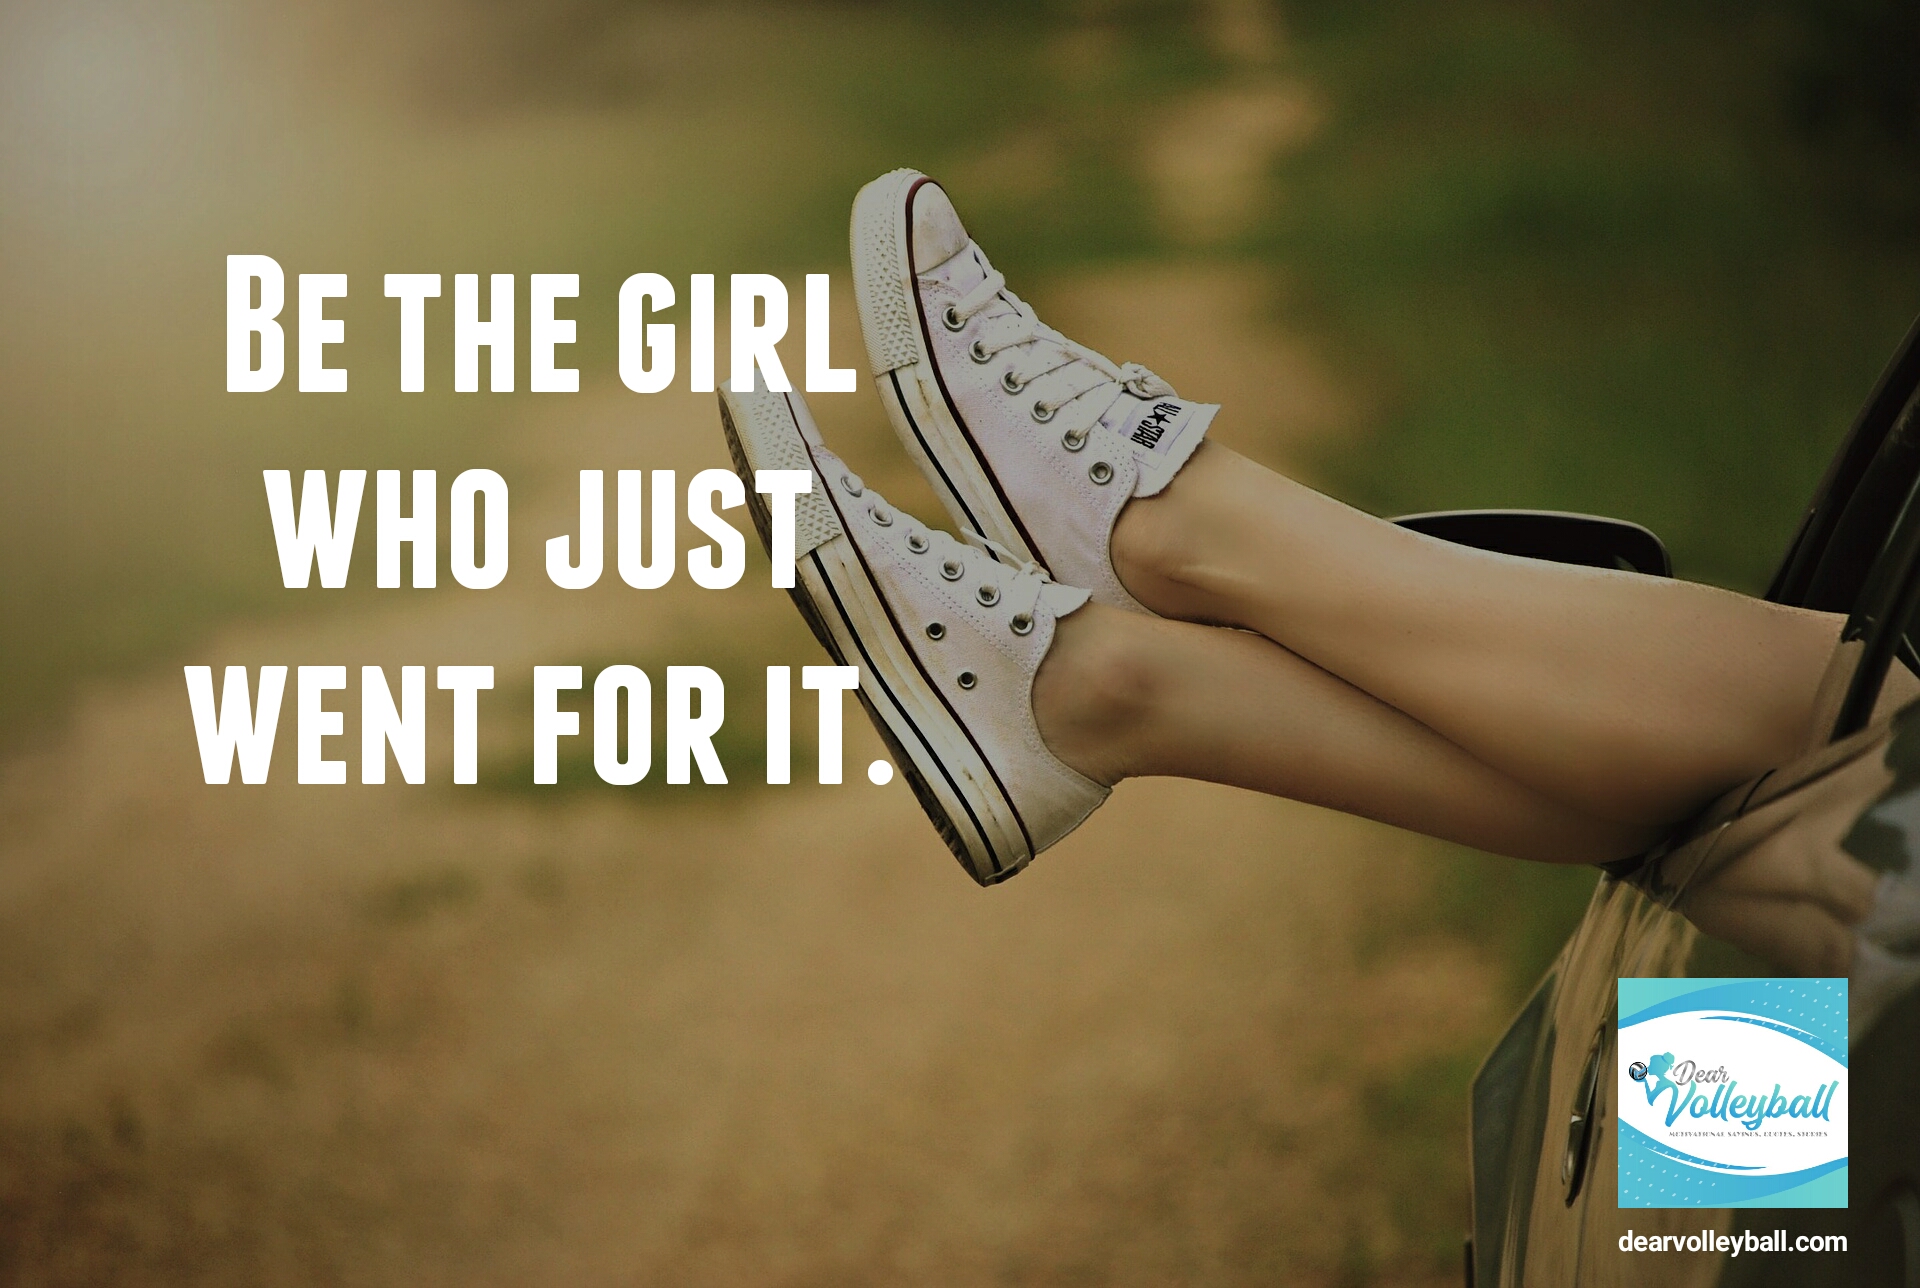 "Be the girl who just went for it" and other strong girls pictures paired with an inspirational volleyball quote on Dear Volleyball.com.